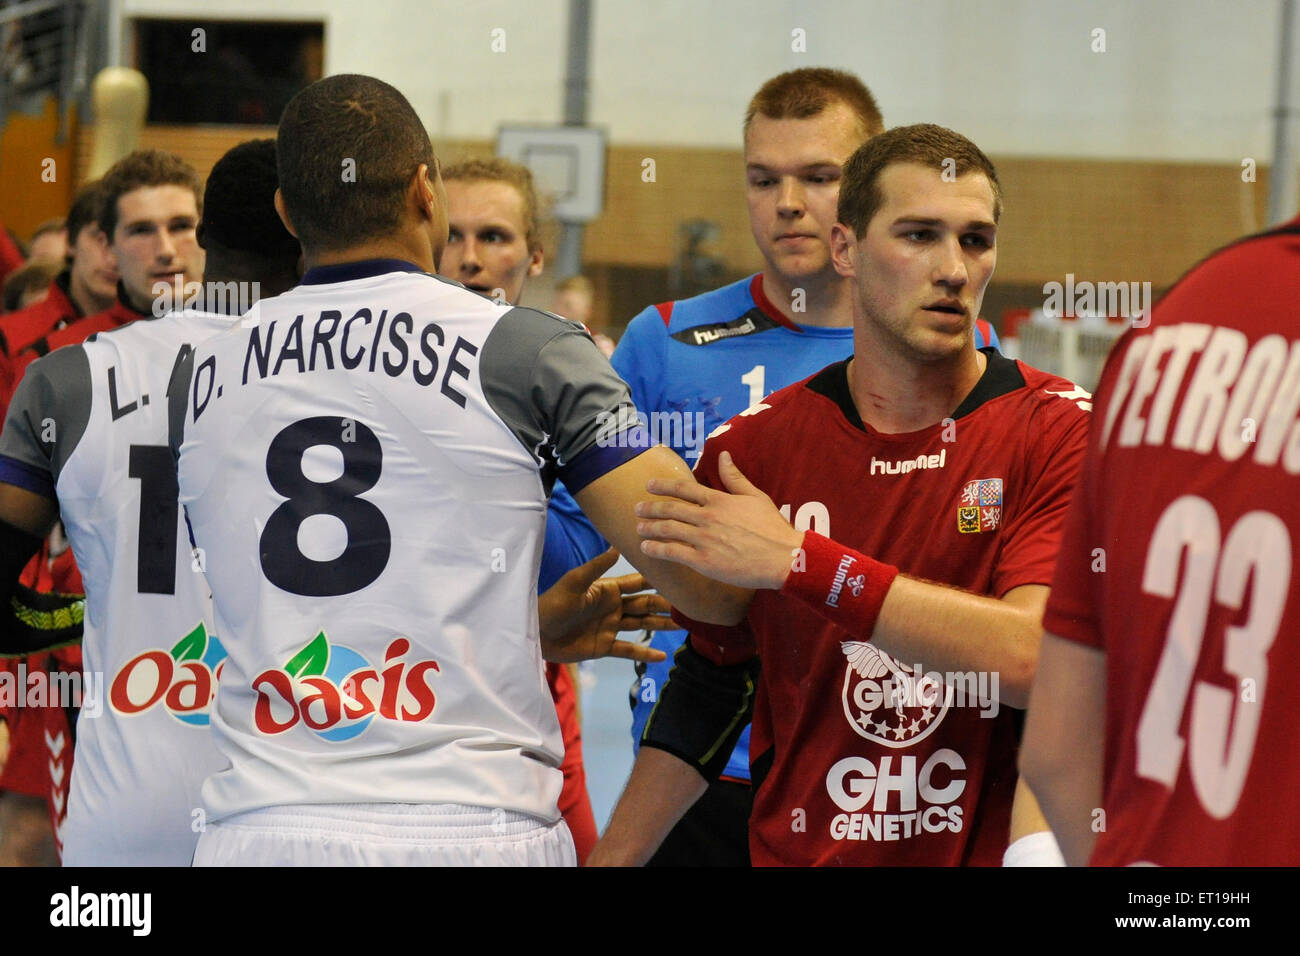 Left to right: Daniel Narcisse (FRA), Tomas Mrkva (CZE) and Tomas Babak  (CZE) are seen after the qualifying handball match Czech Republic vs France  for 2016 Men's European Championship in Brno, Czech